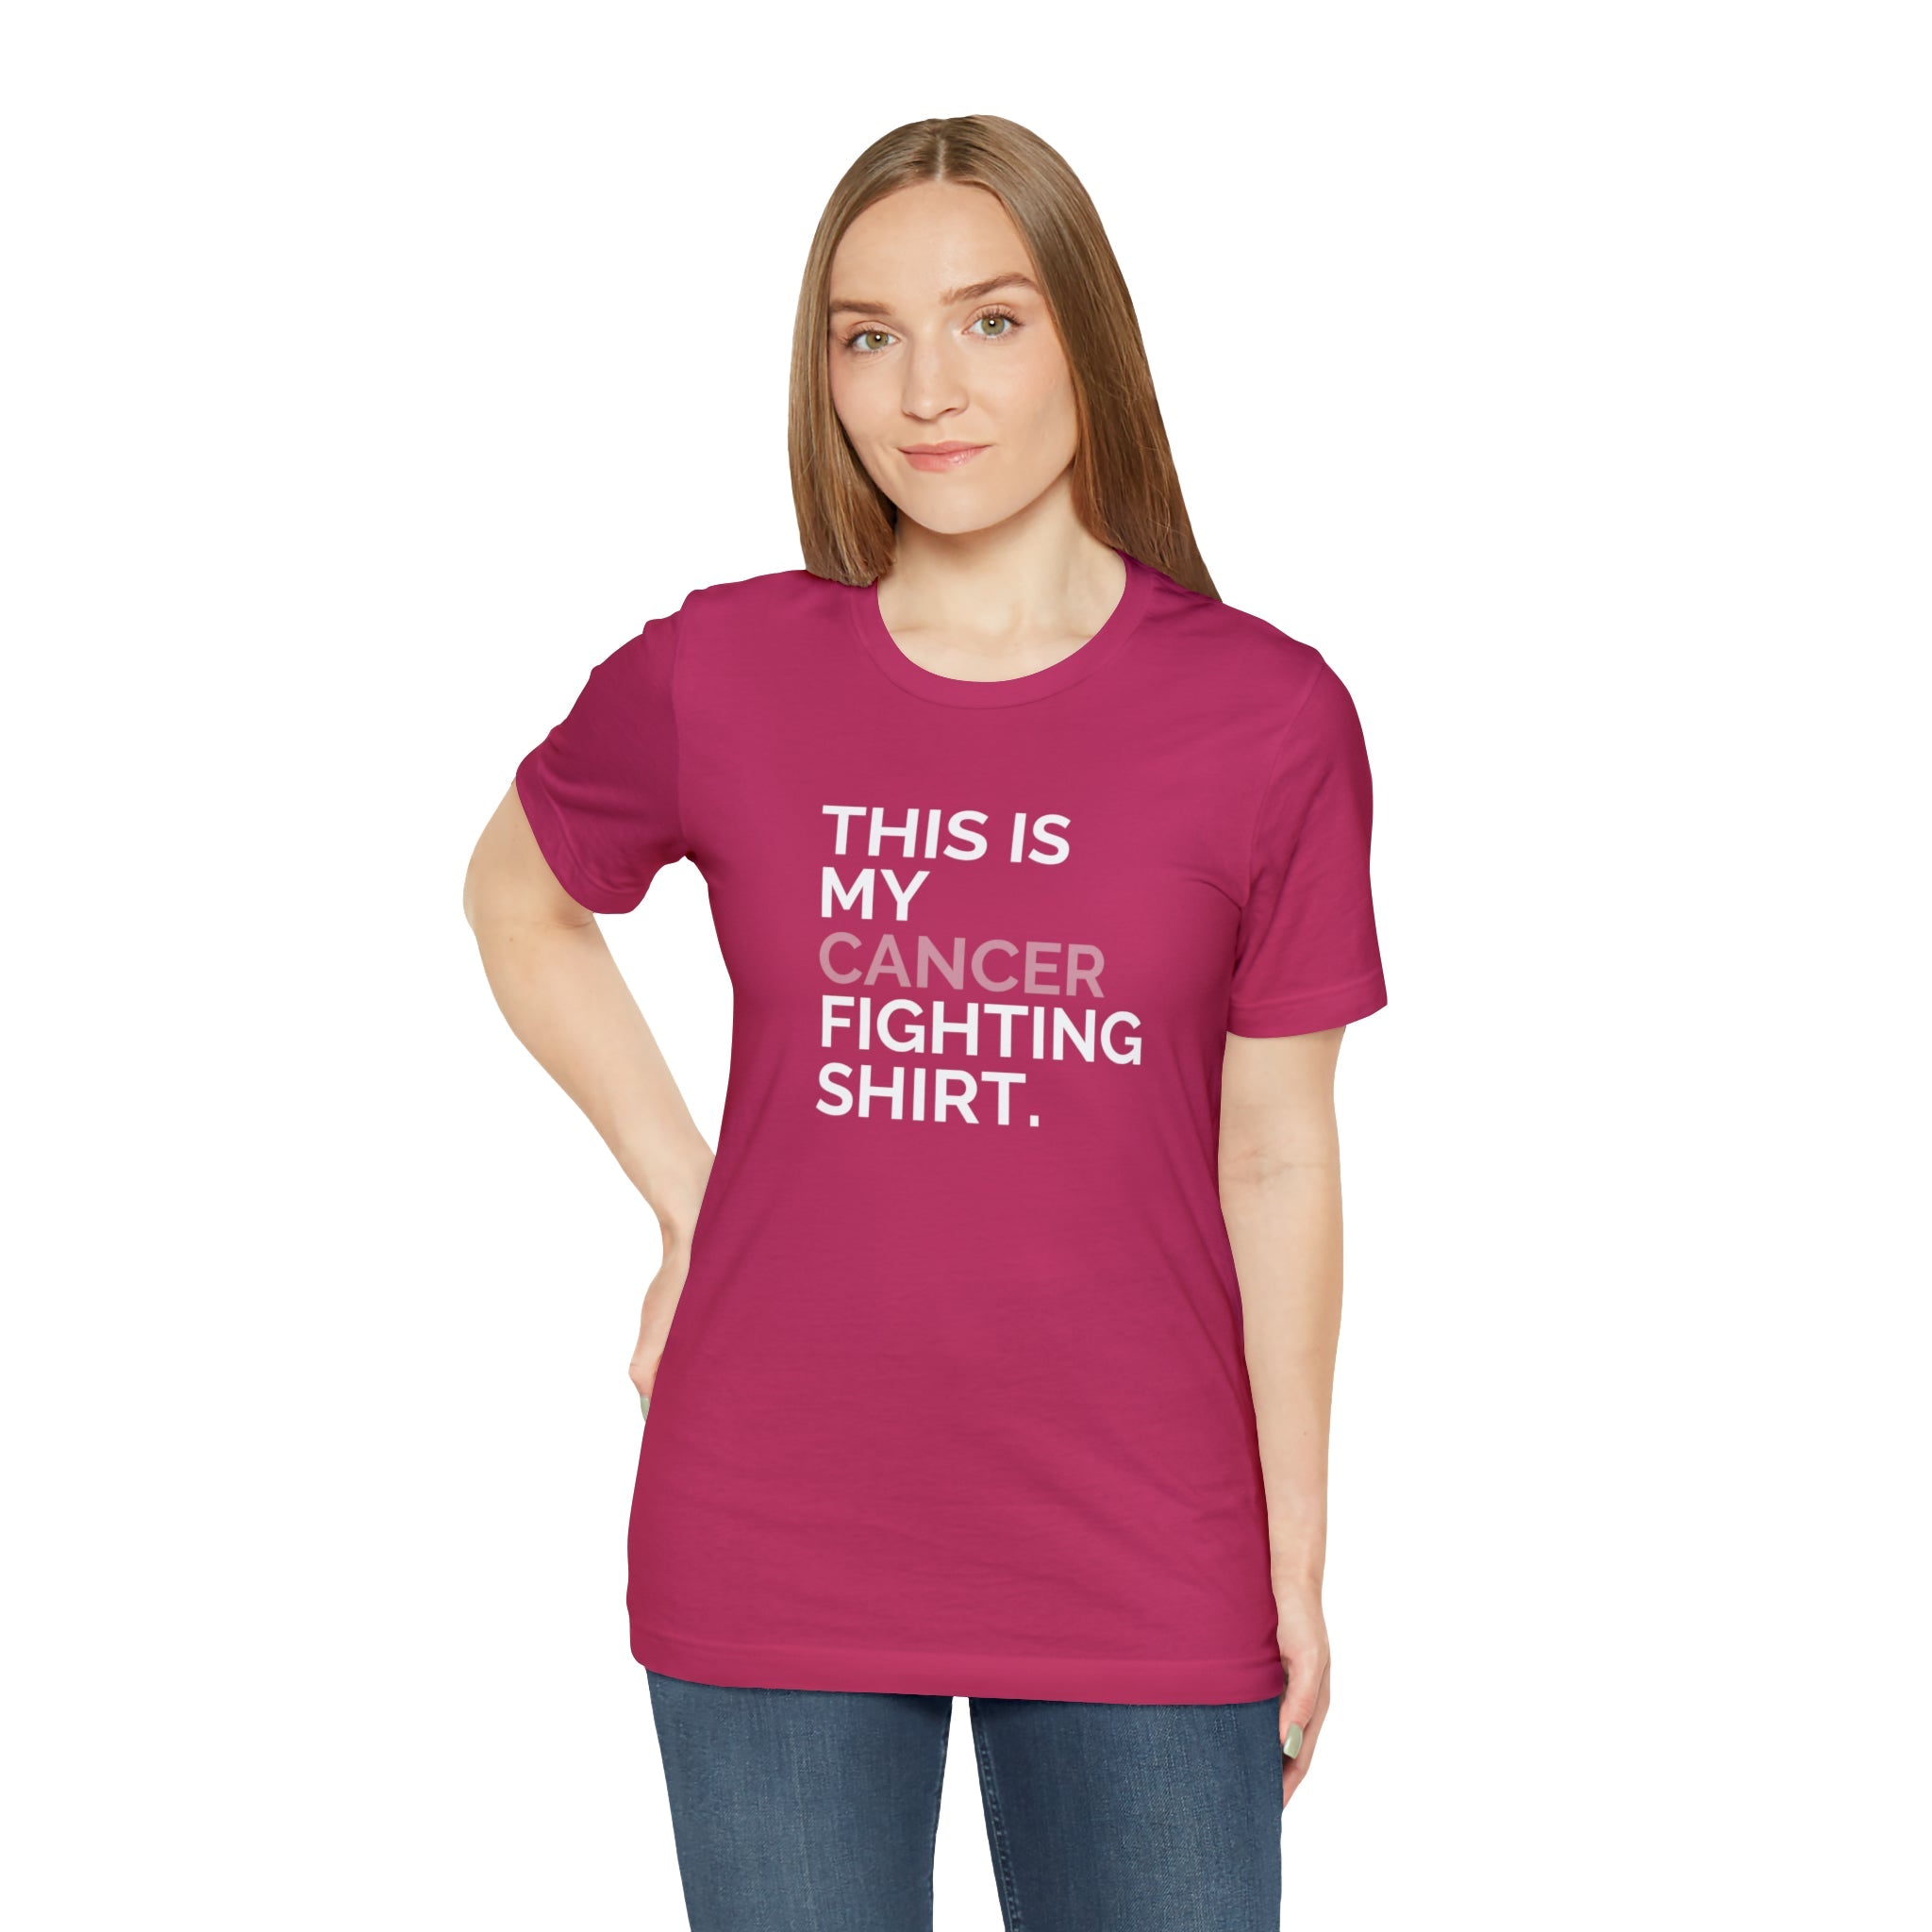 This is My Cancer Fighting Shirt Unisex Jersey Short Sleeve Tee - The Kindness Cause